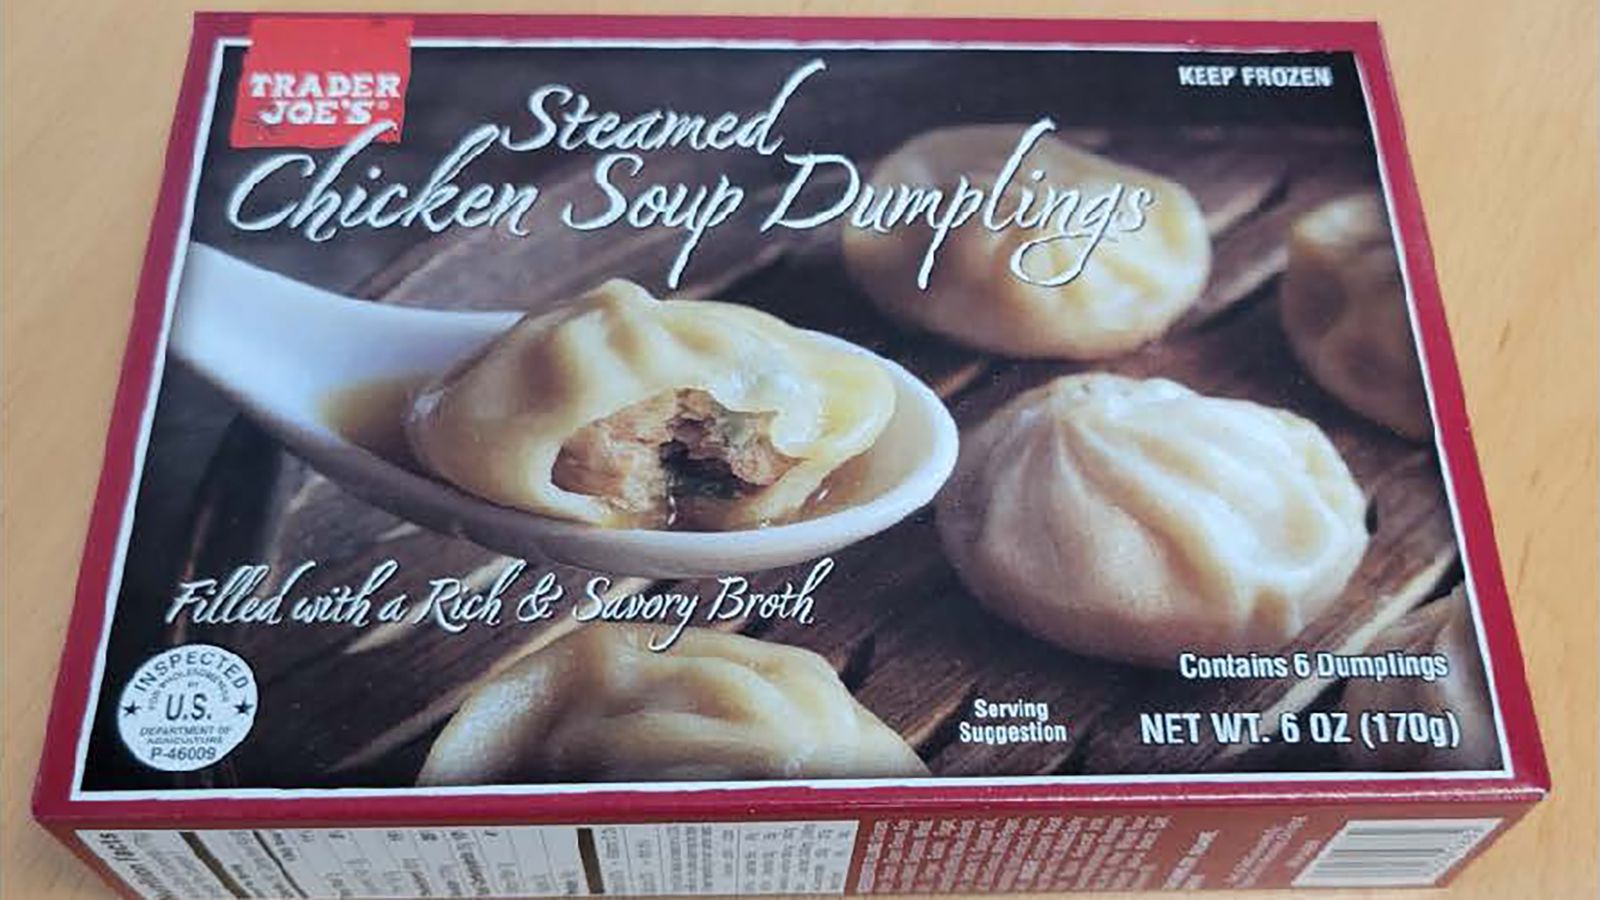 Thousands of pounds of Trader Joe's chicken soup dumplings have been recalled due to possible conta...